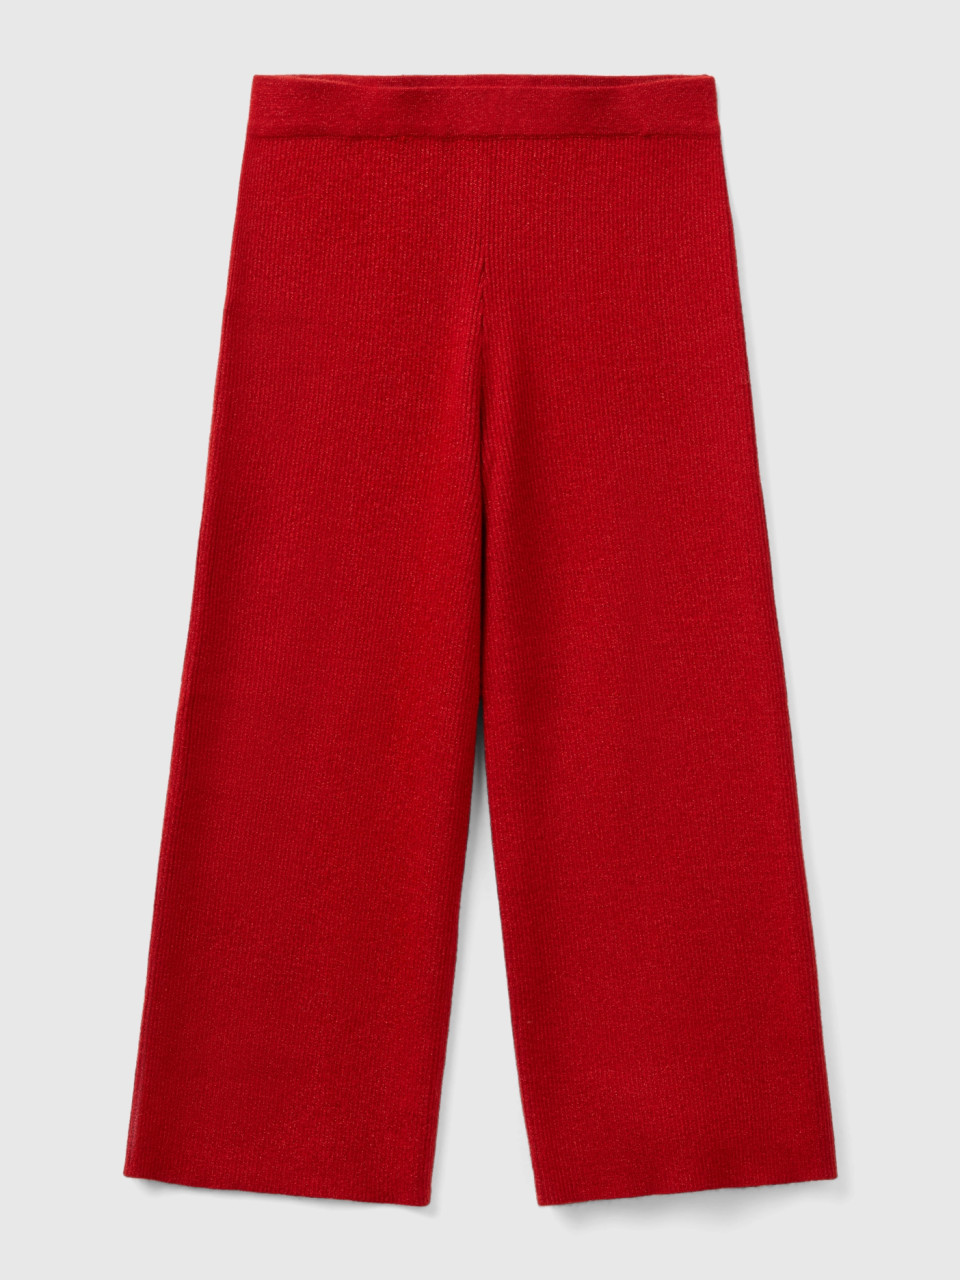 Benetton, Knit Pants With Lurex, Red, Kids